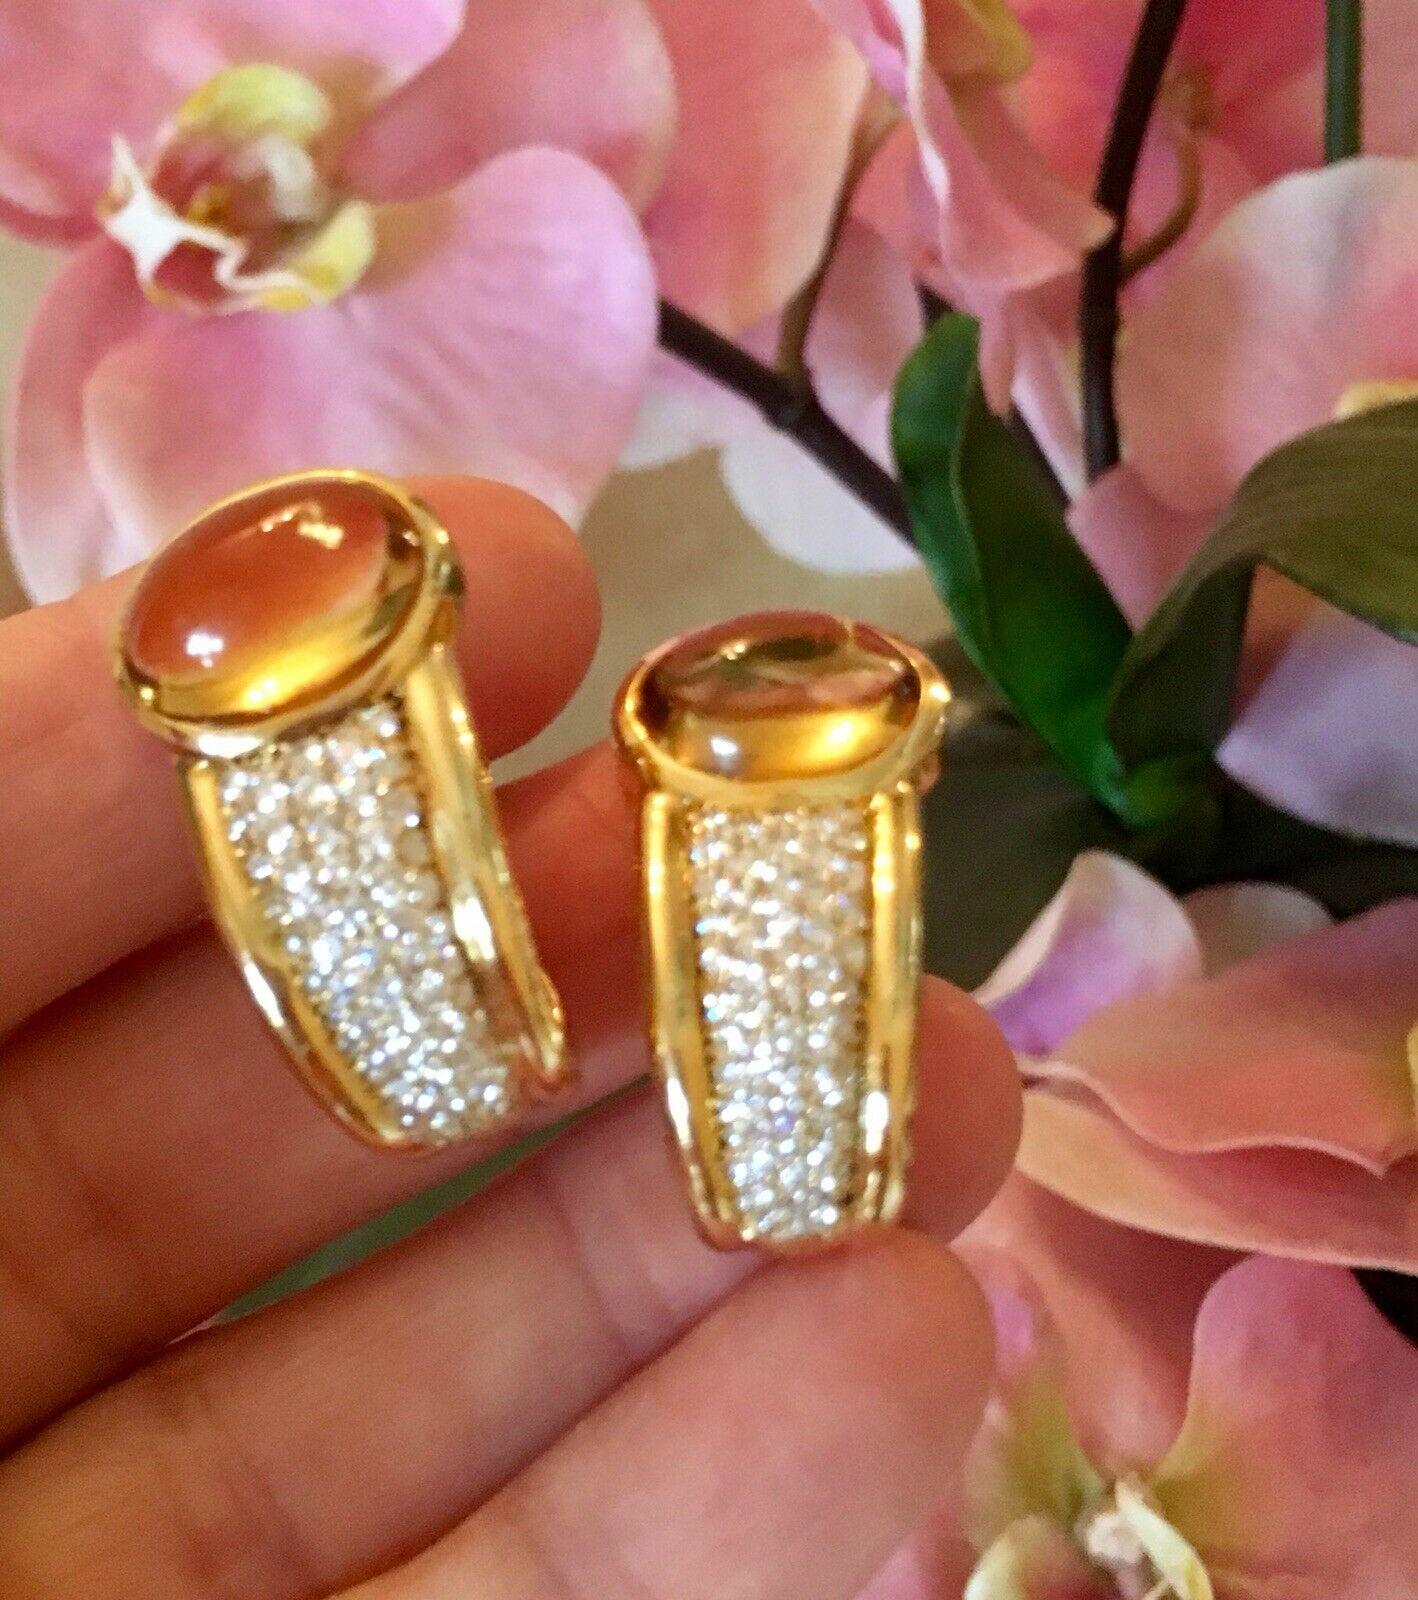 Stunning 18 Karat Gold 1980s Citrine Diamond Pave Half Hoop Earrings In Excellent Condition For Sale In Shaker Heights, OH